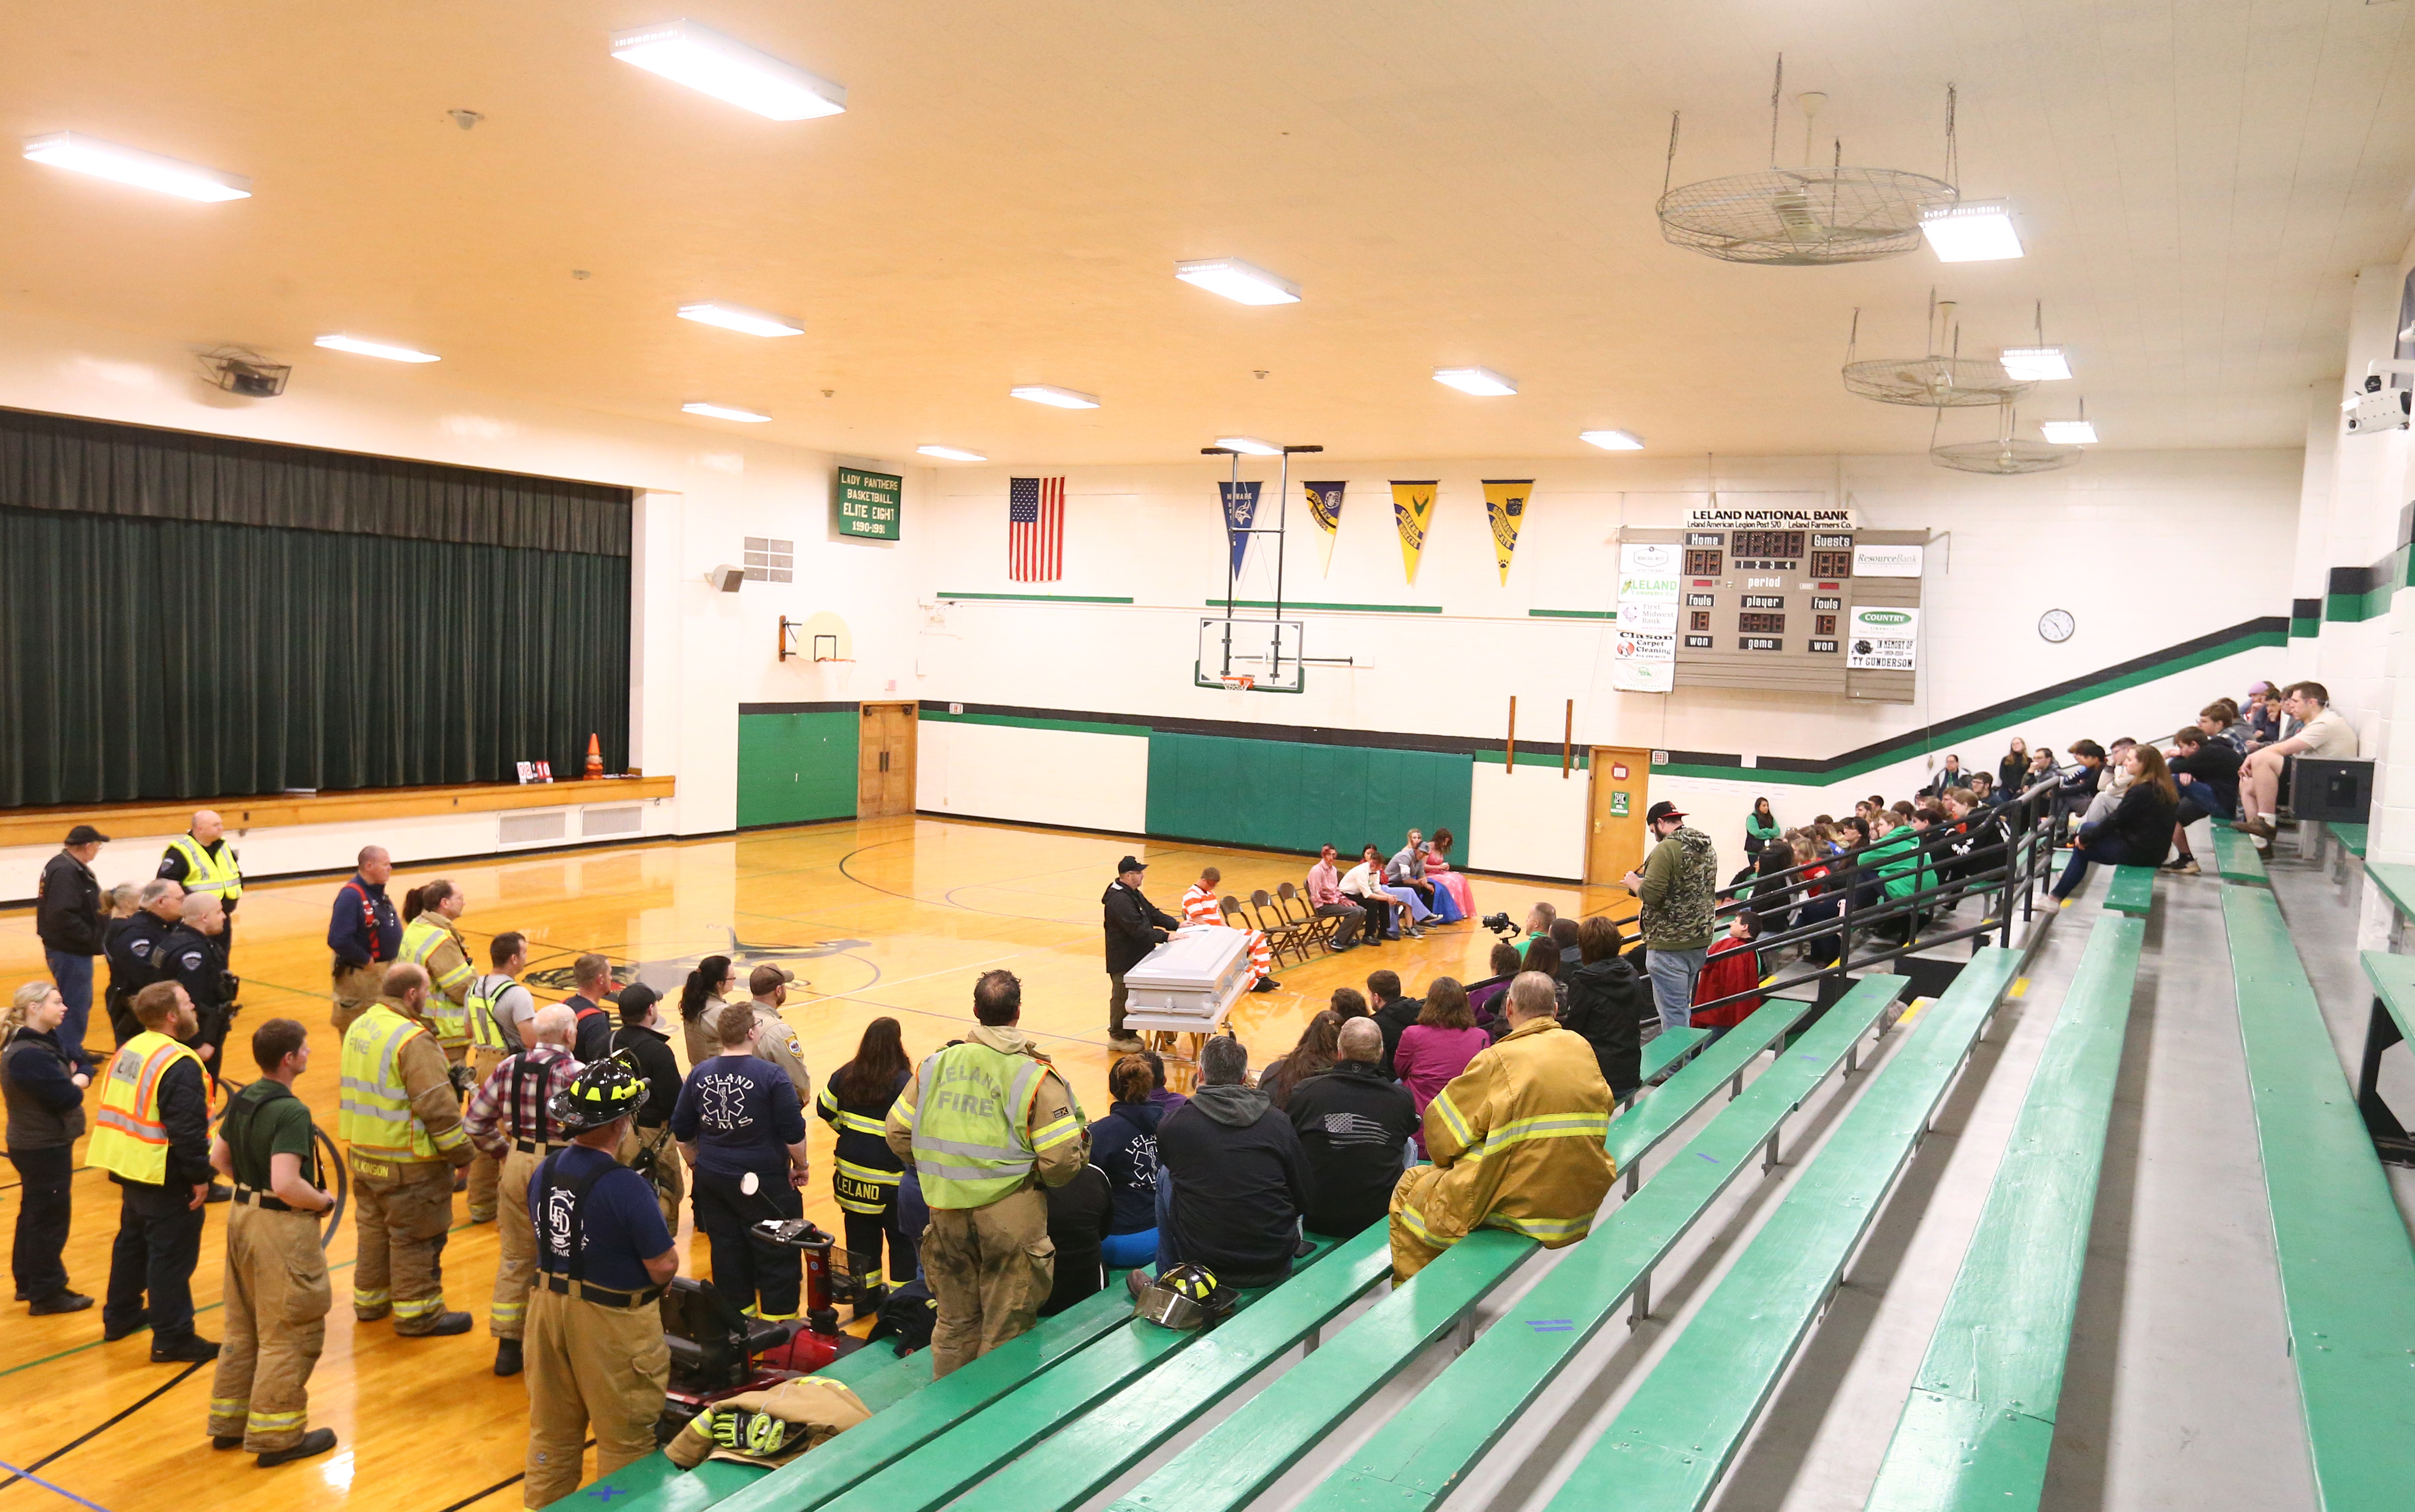 Leland High School hosts mock prom disaster drill to hit home safety lesson  – Shaw Local